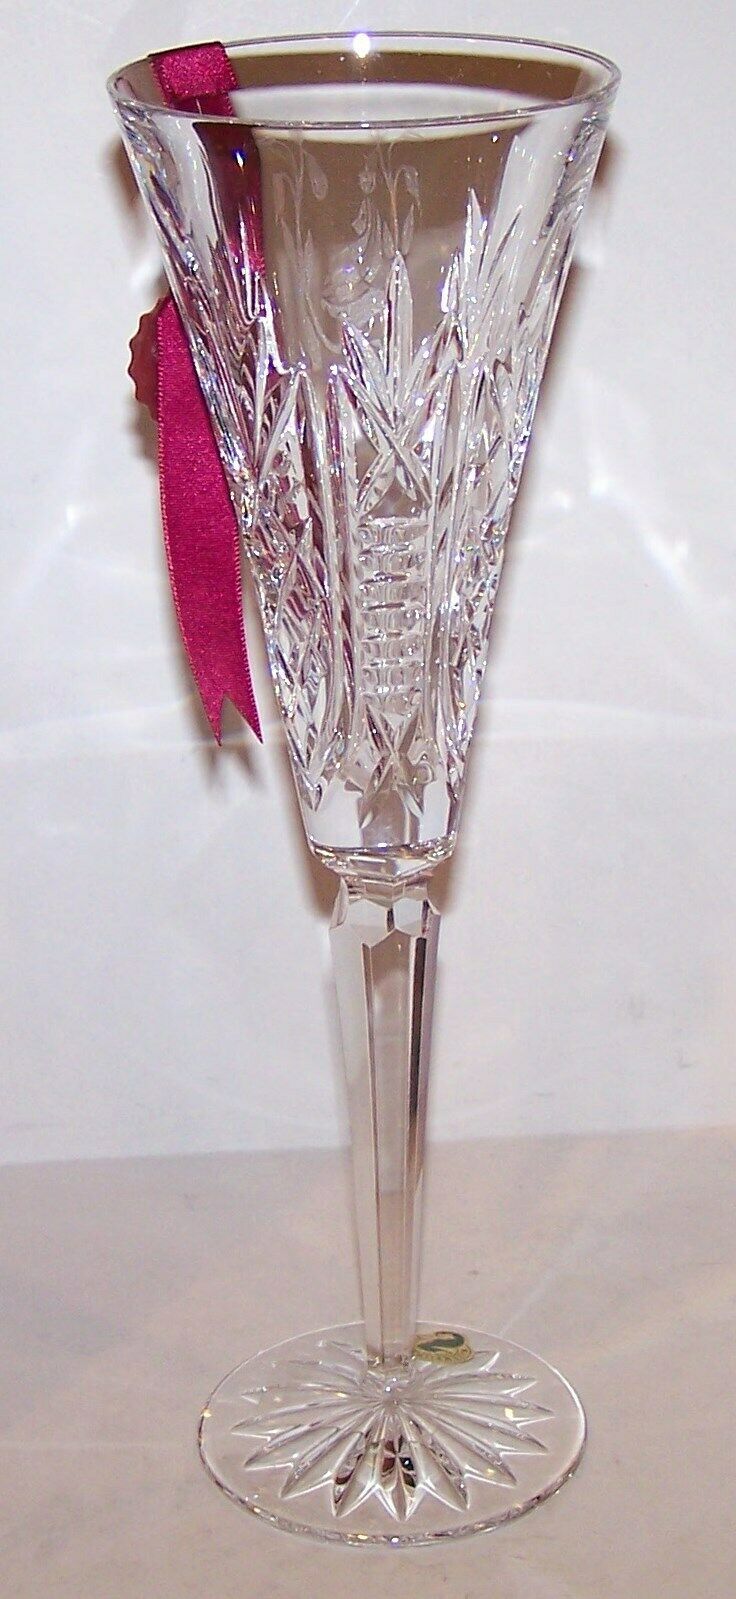 Waterford Crystal 1st Edition 12 Days of Christmas Champagne Flute Partridge in a Pear Tree